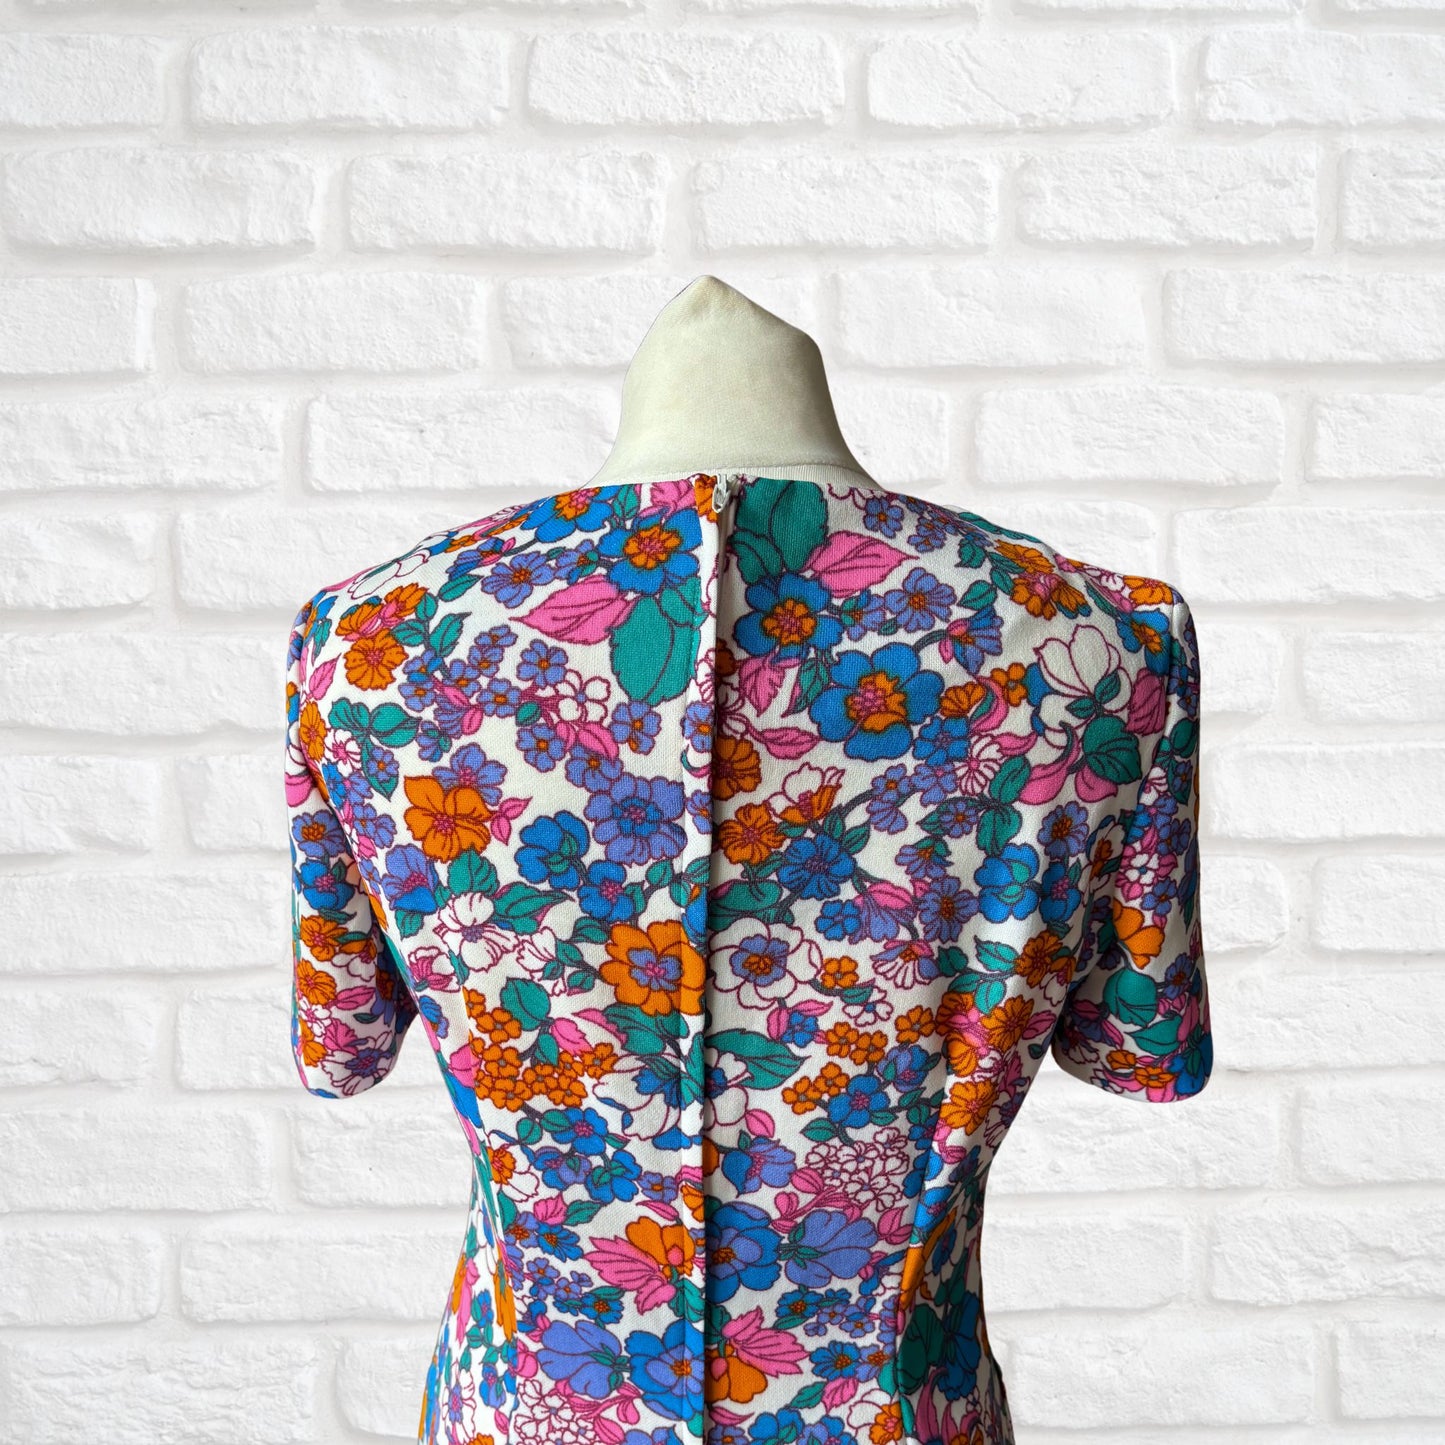 60s Bright Floral Short Sleeved Vintage Scooter Dress. Approx UK size 10-12